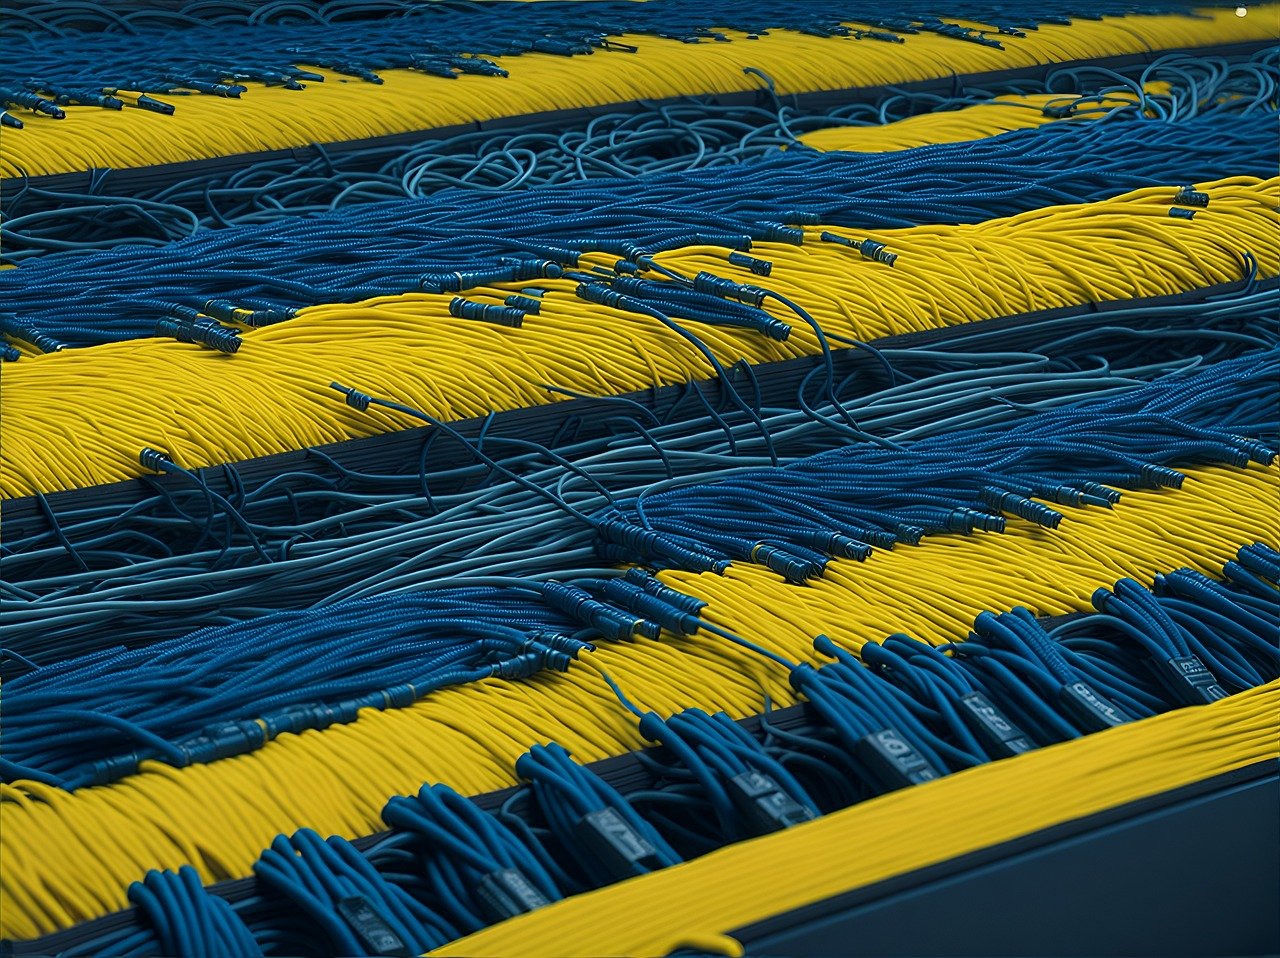 many wires are neatly arranged in a group